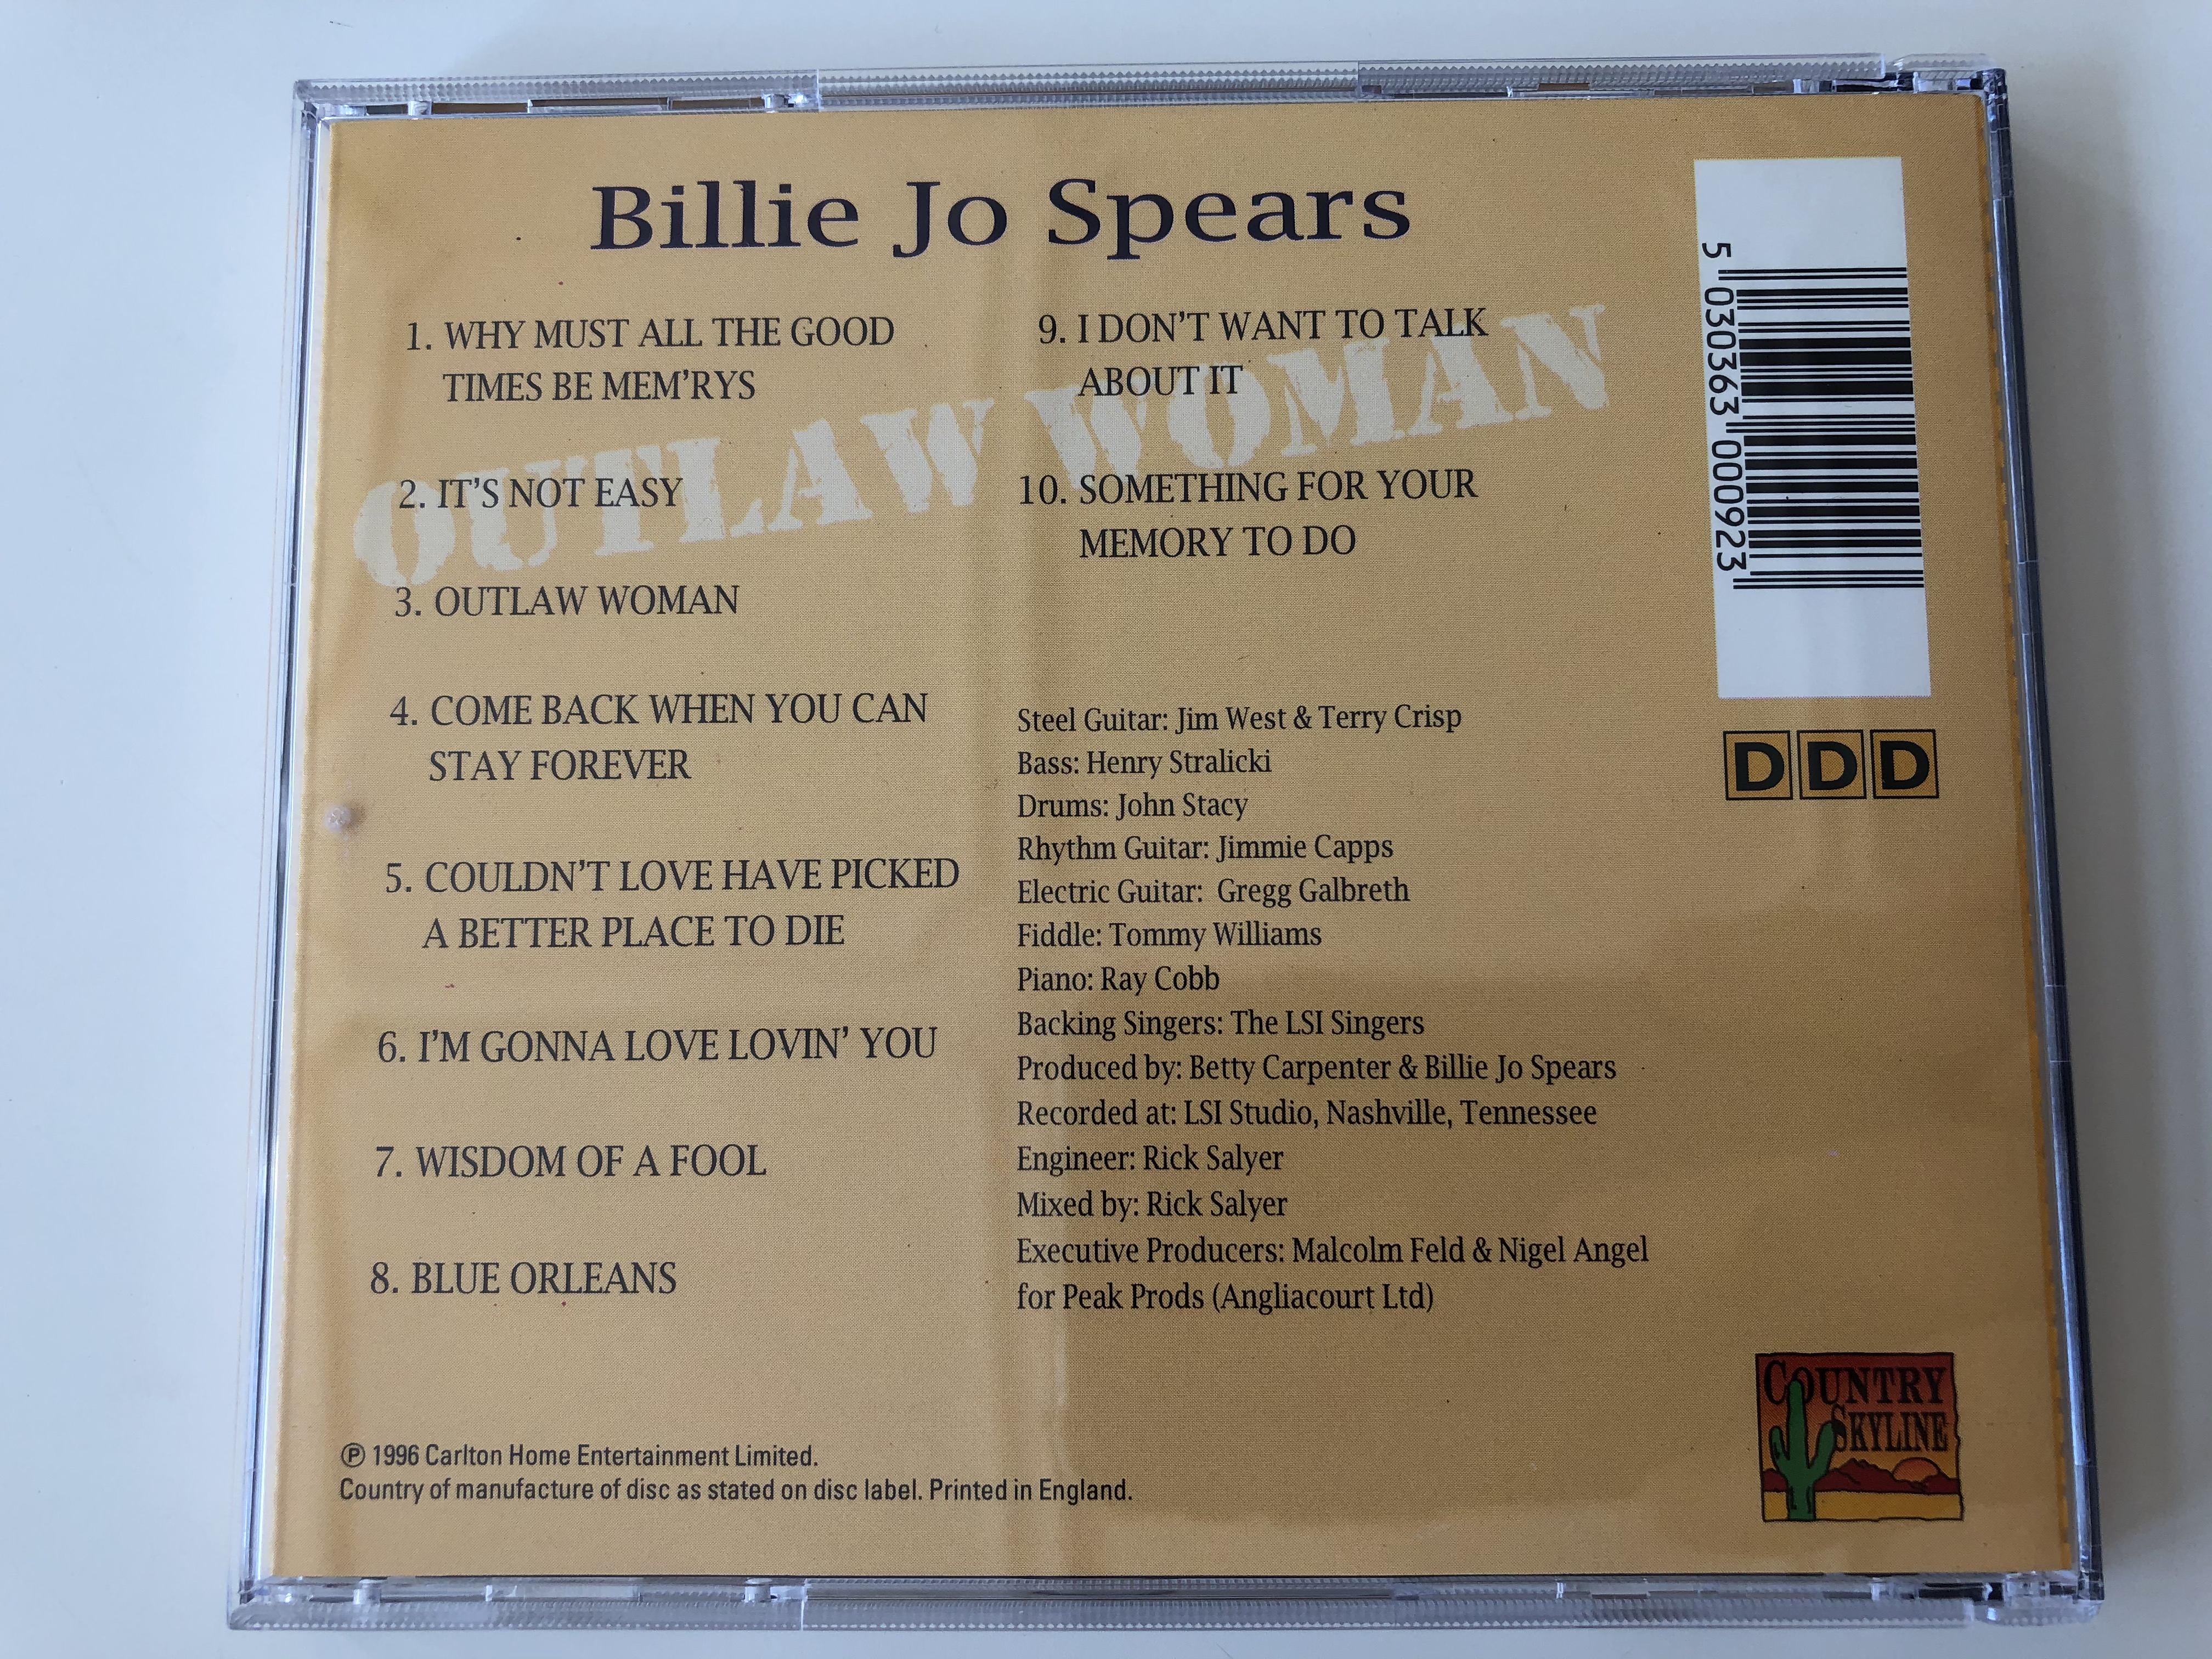 billie-jo-spears-outlaw-woman-featuring-i-don-t-to-talk-about-it-wisdom-of-a-fool-blue-orleans-country-skyline-audio-cd-1996-30363-00092-5-.jpg